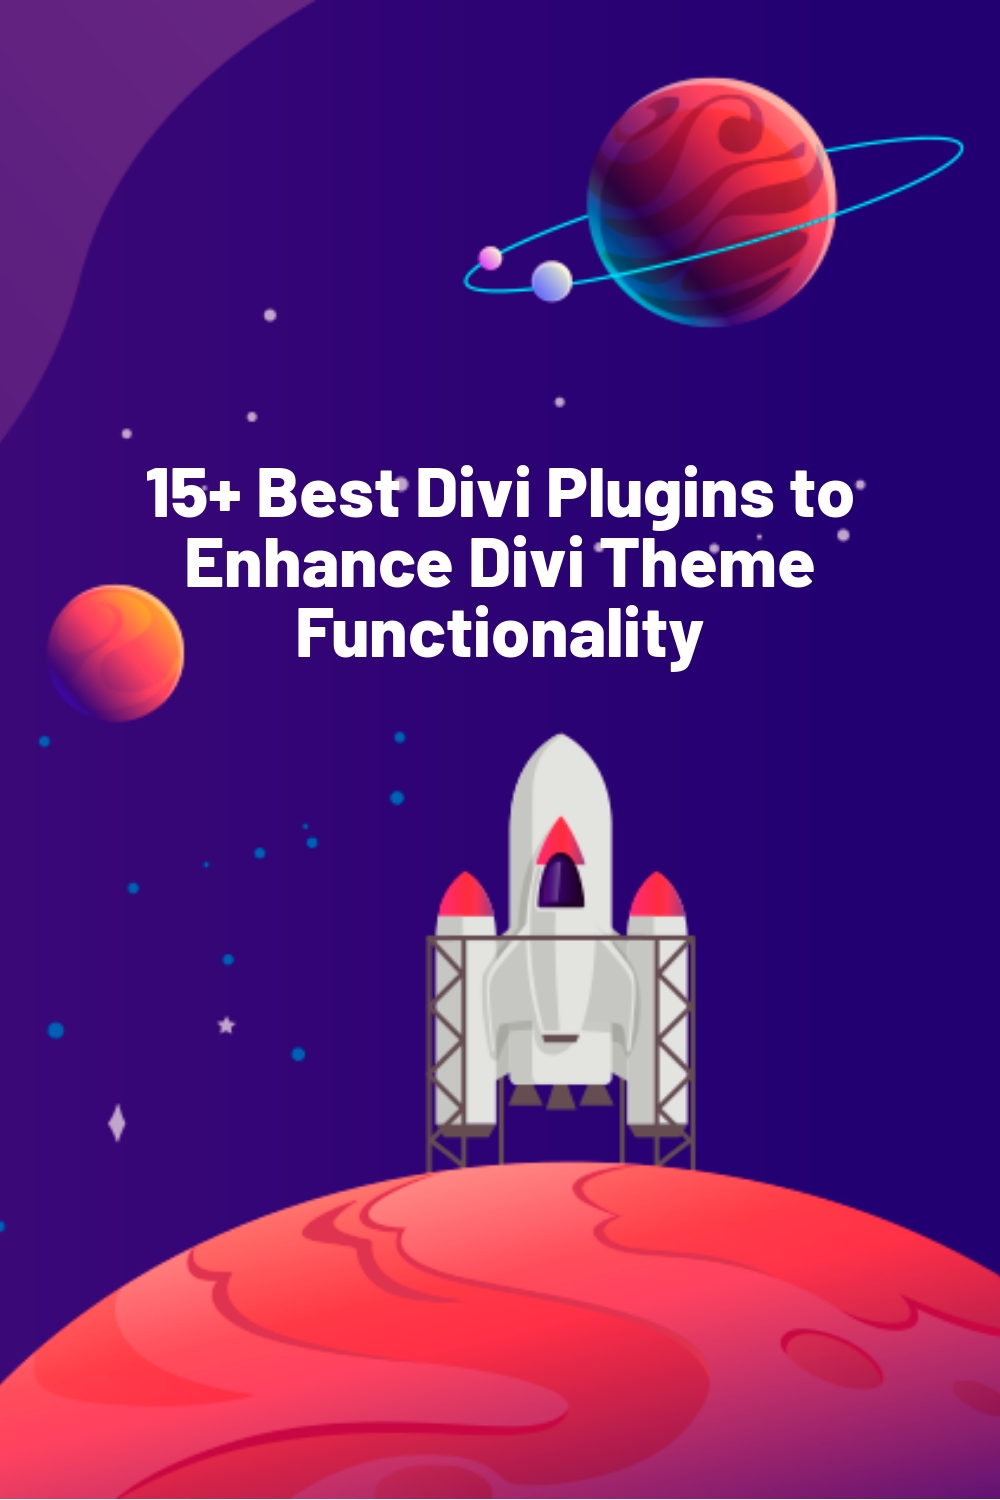 15+ Best Divi Plugins to Enhance Divi Theme Functionality